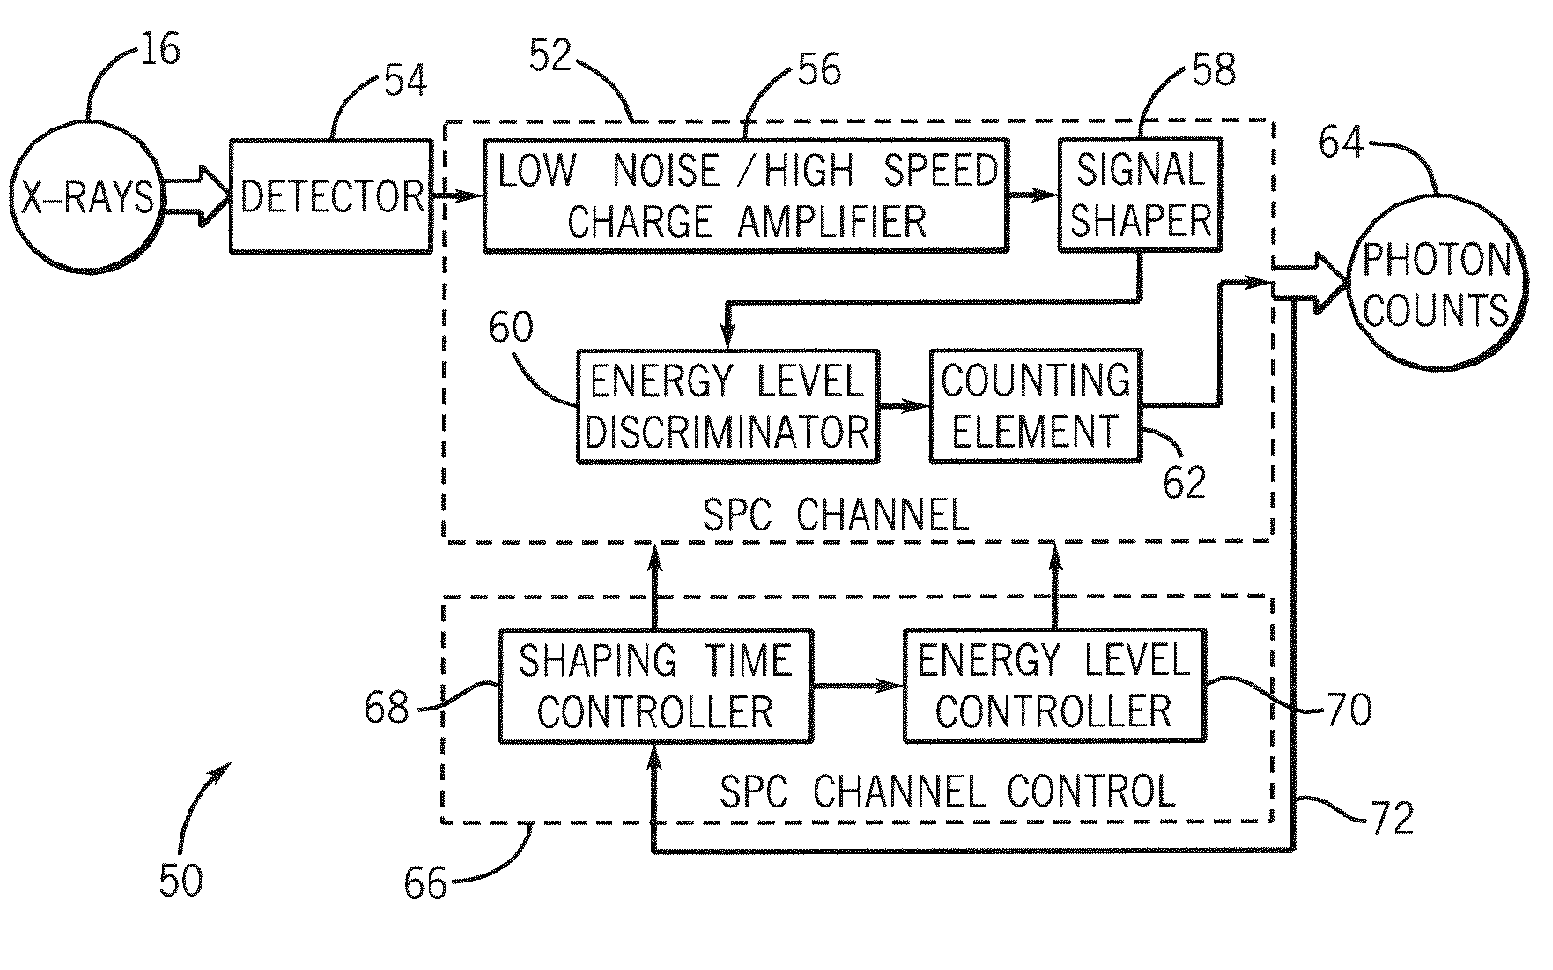 Method and system of dynamically controlling shaping time of a photon counting energy-sensitive radiation detector to accommodate variations in incident radiation flux levels